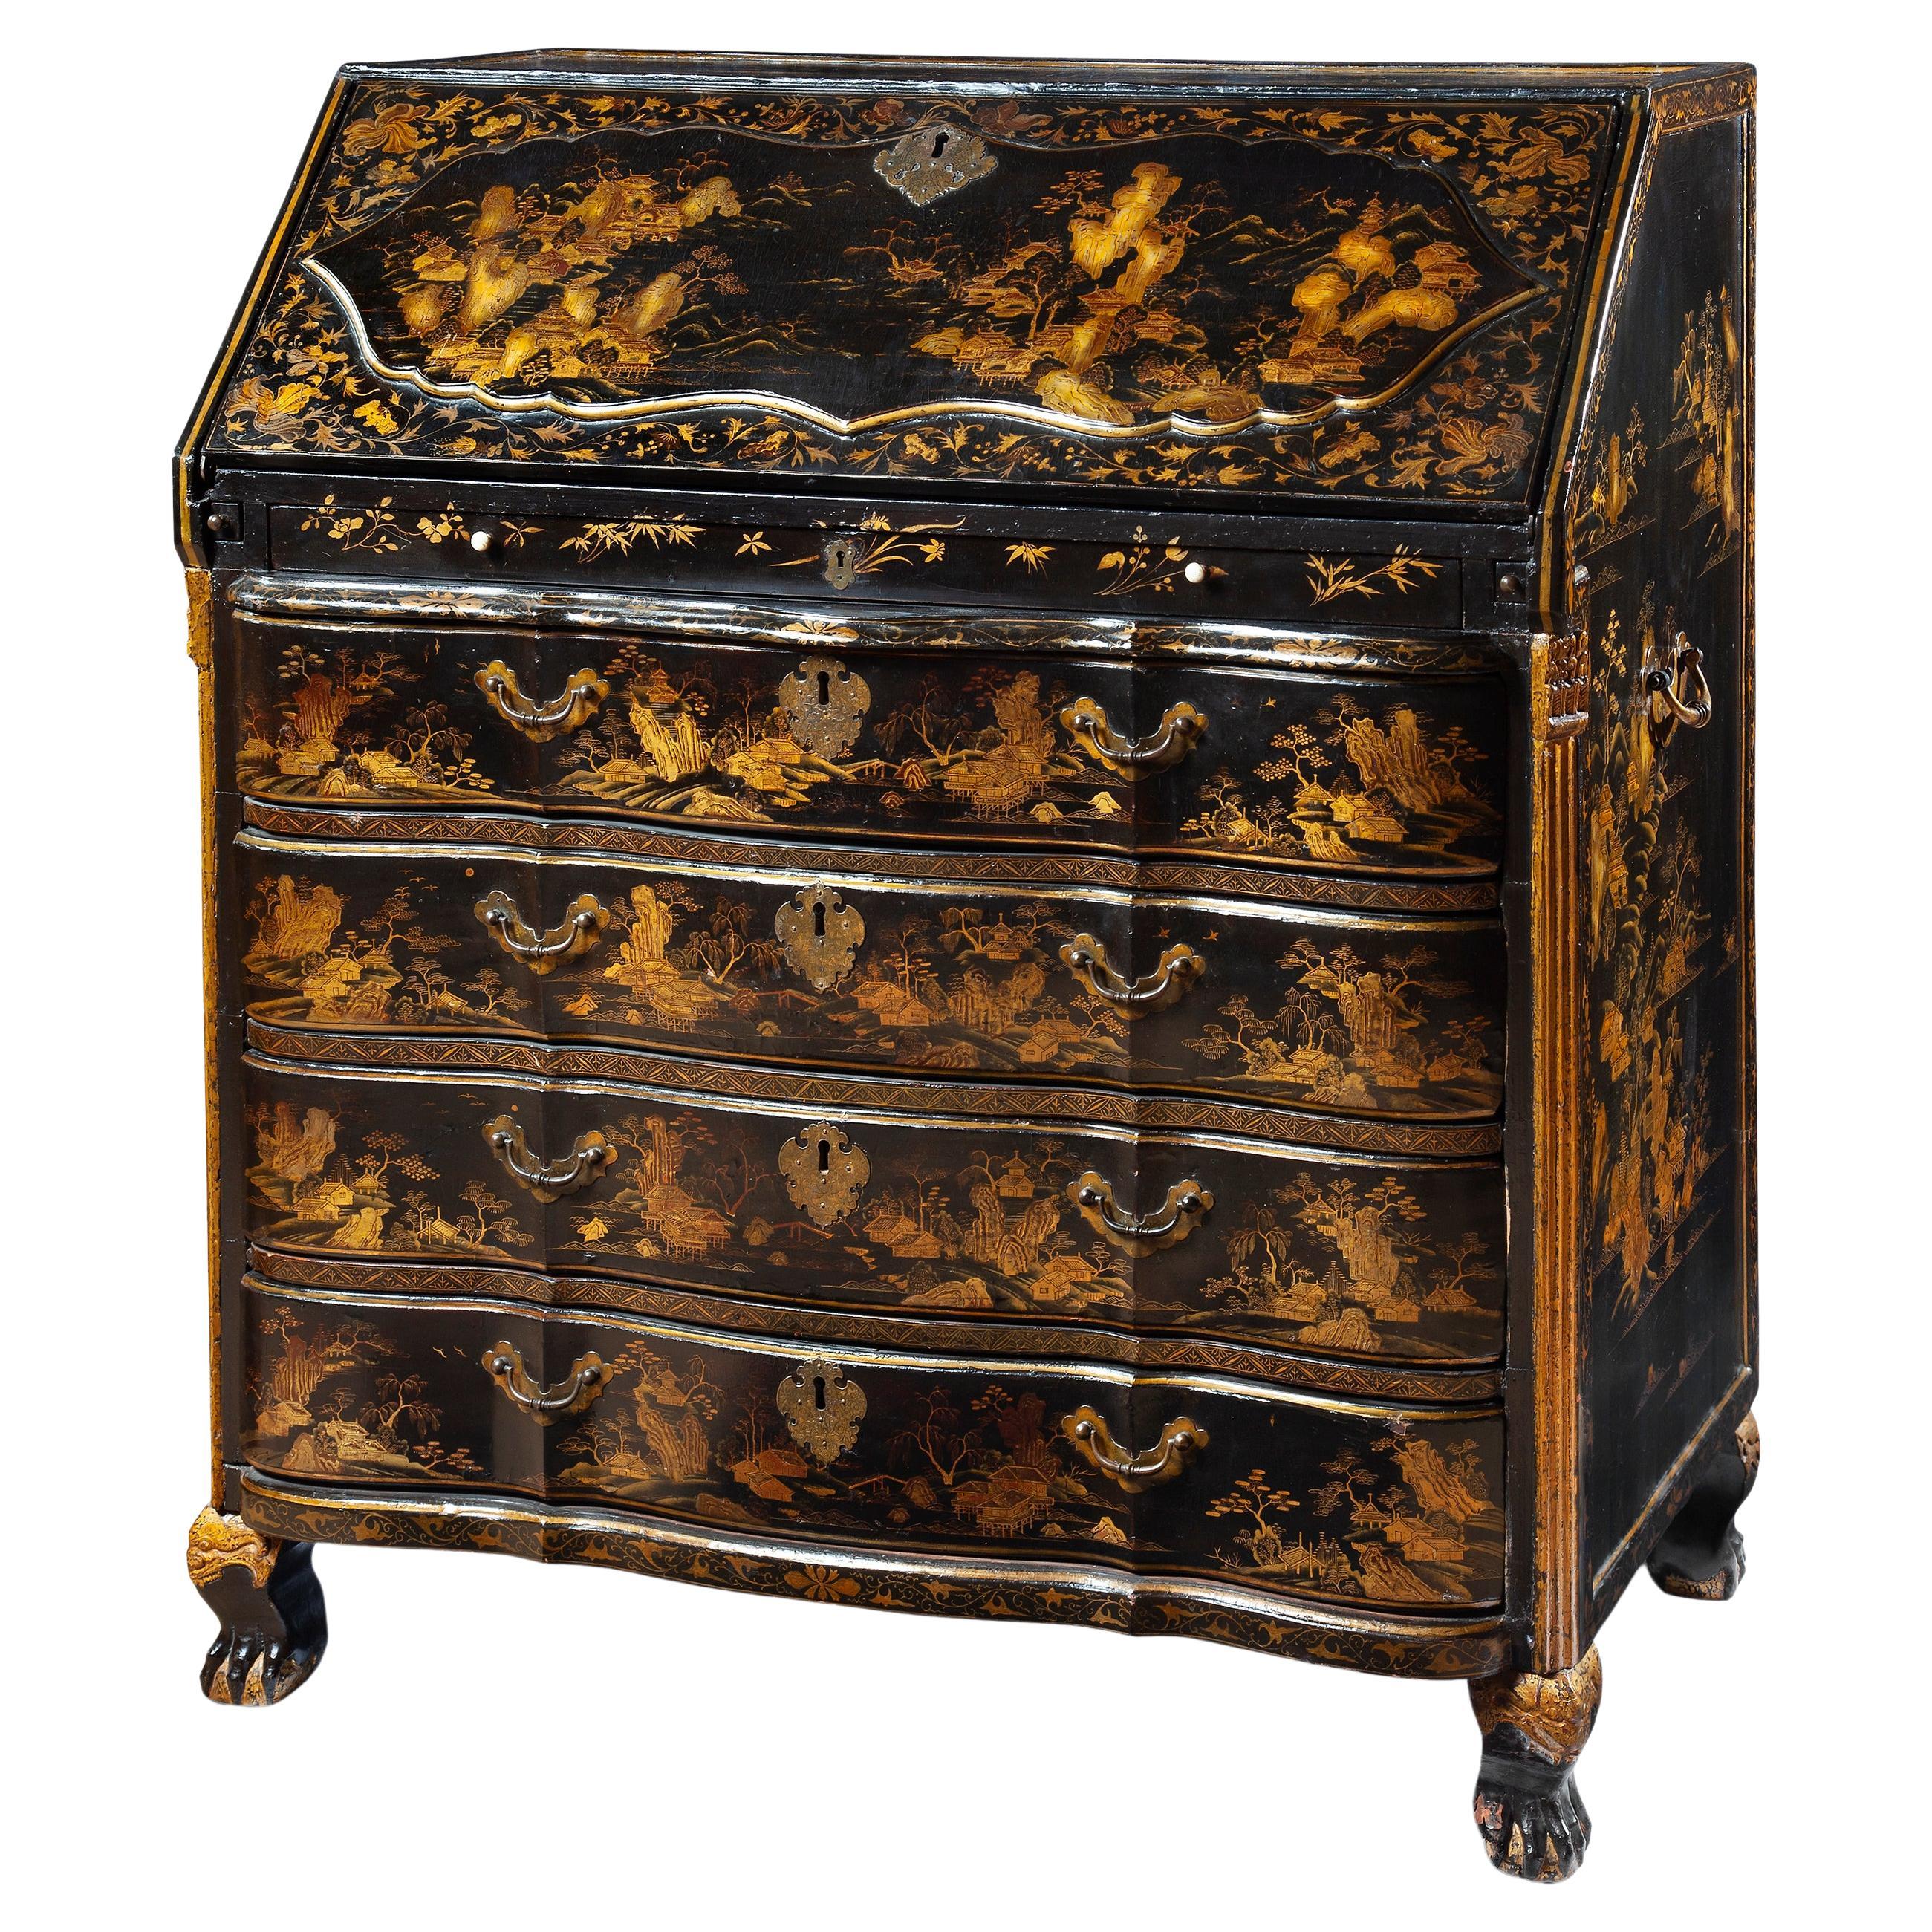 18th Century Chinese Export Lacquer Chinoiserie Bureau Desk for the Dutch Market